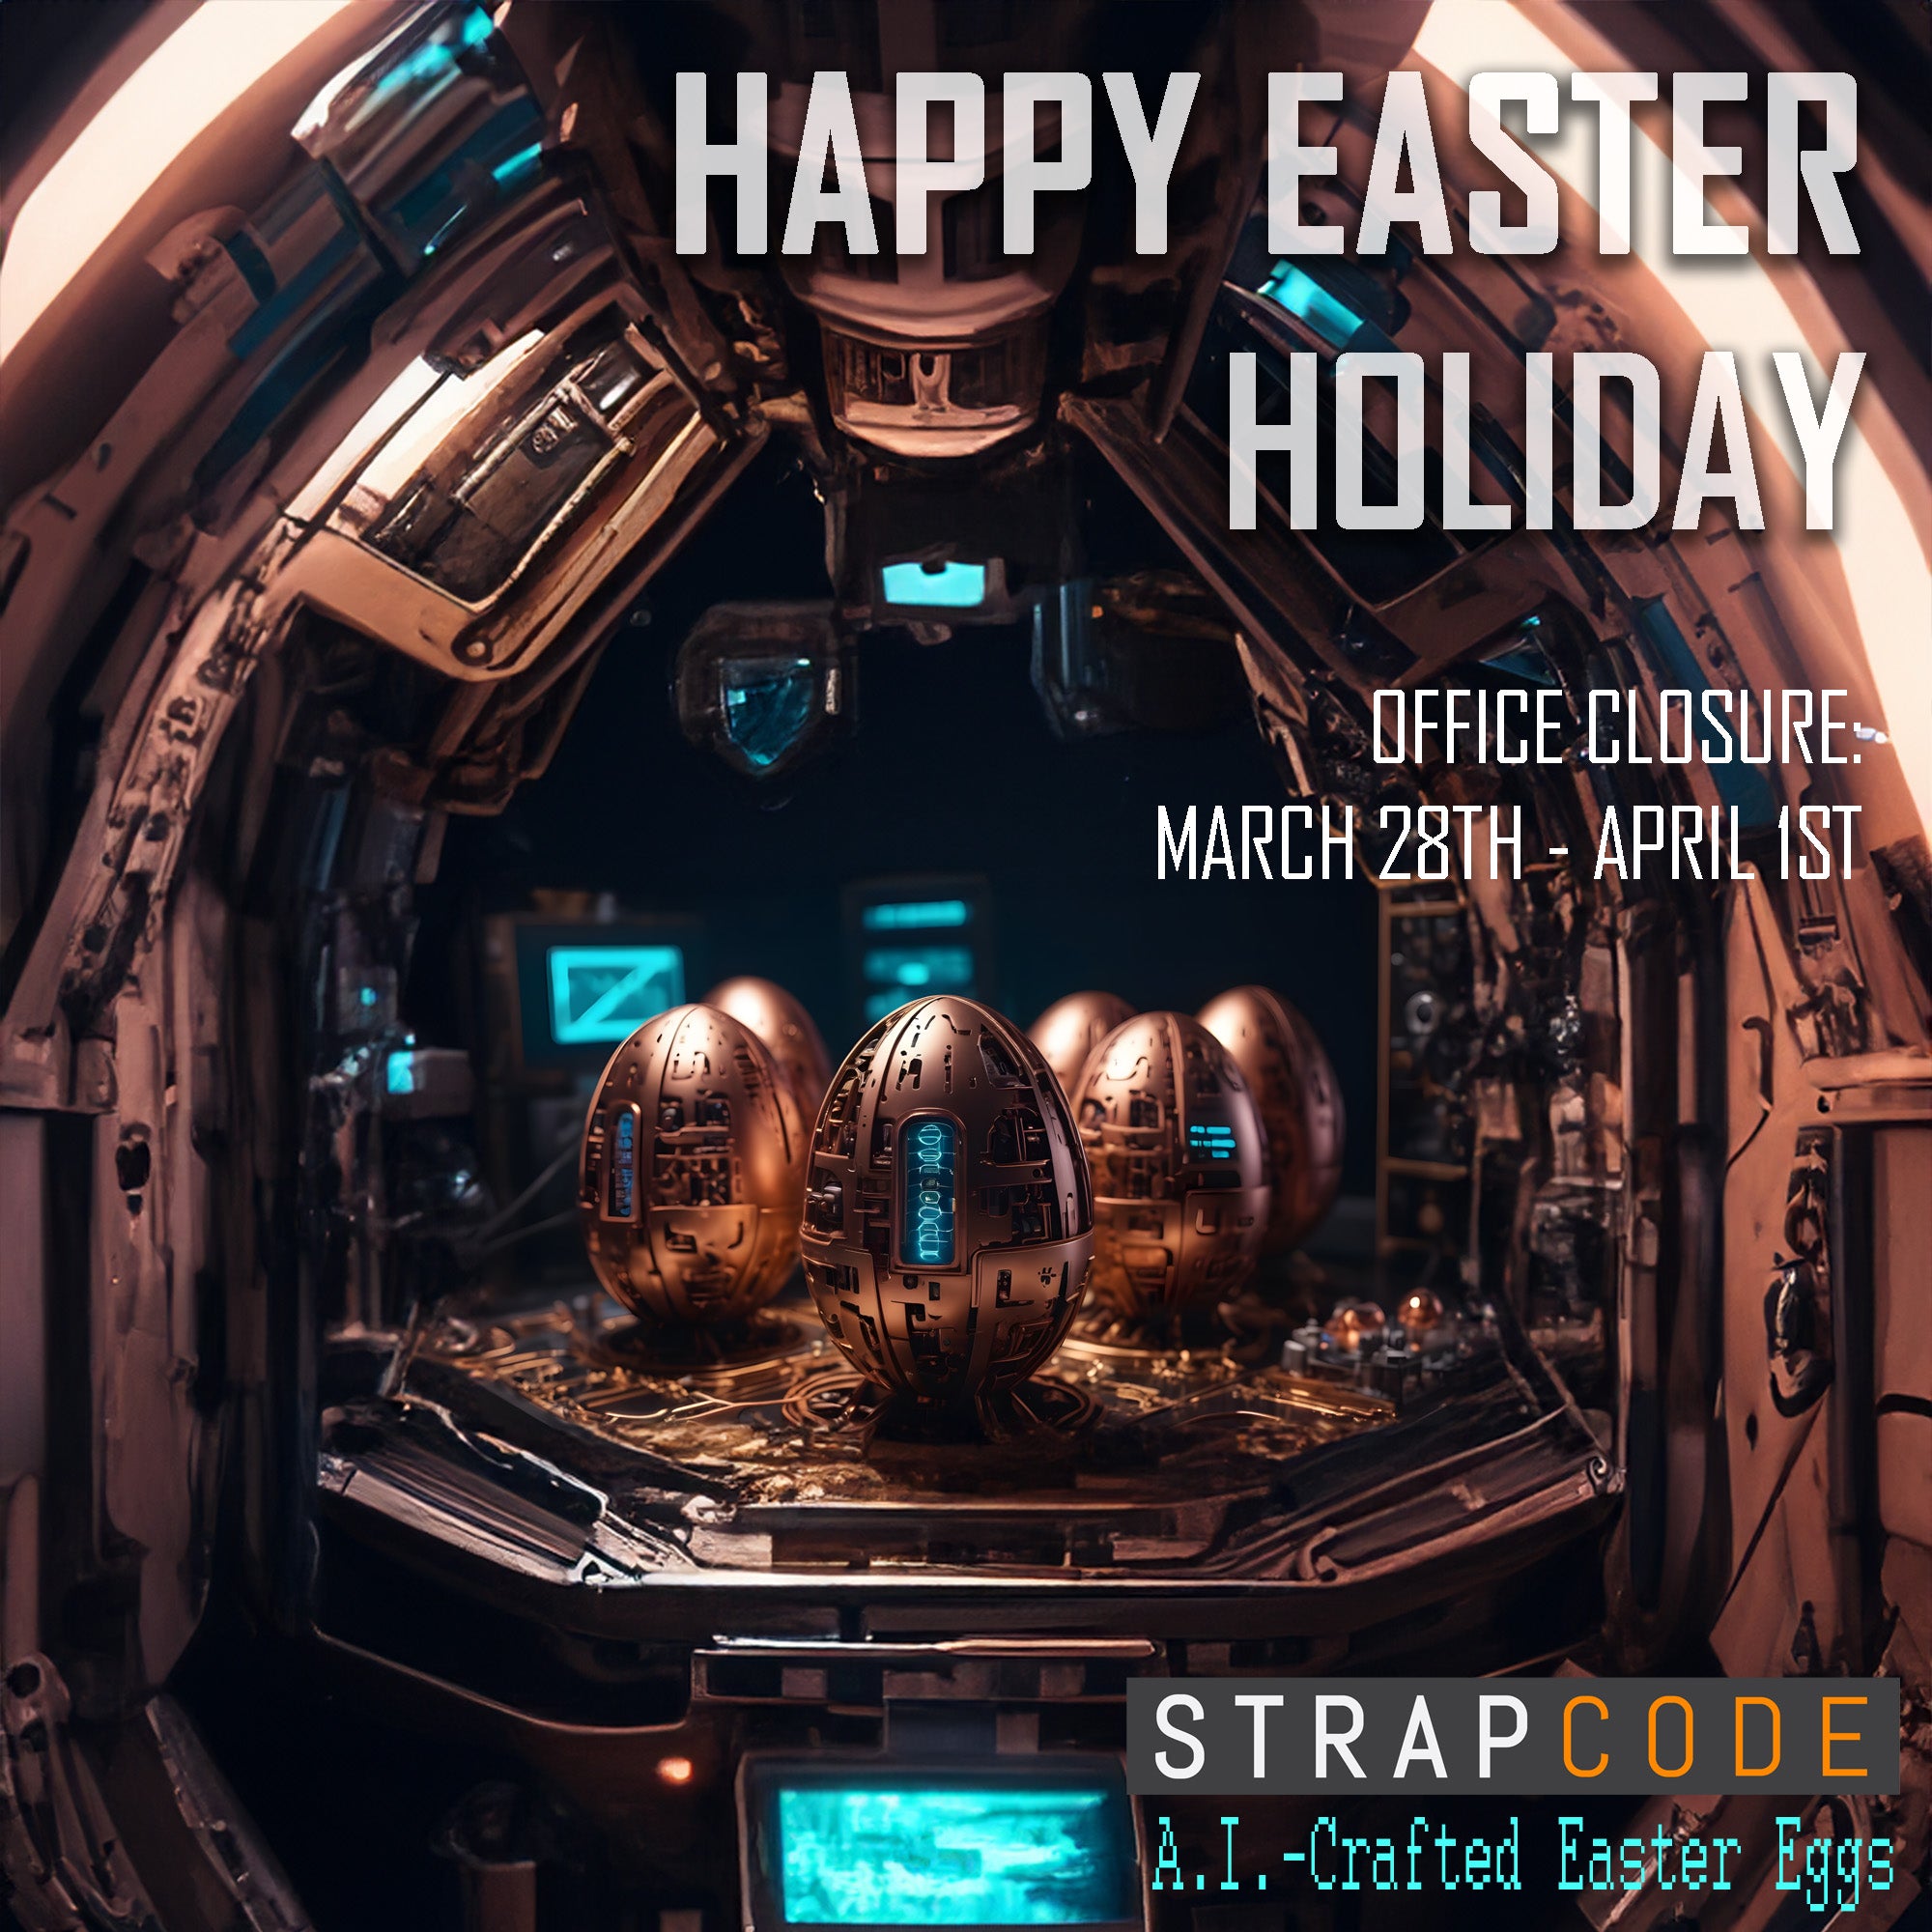 Strapcode Watch Bands - Easter Office Closure 2024